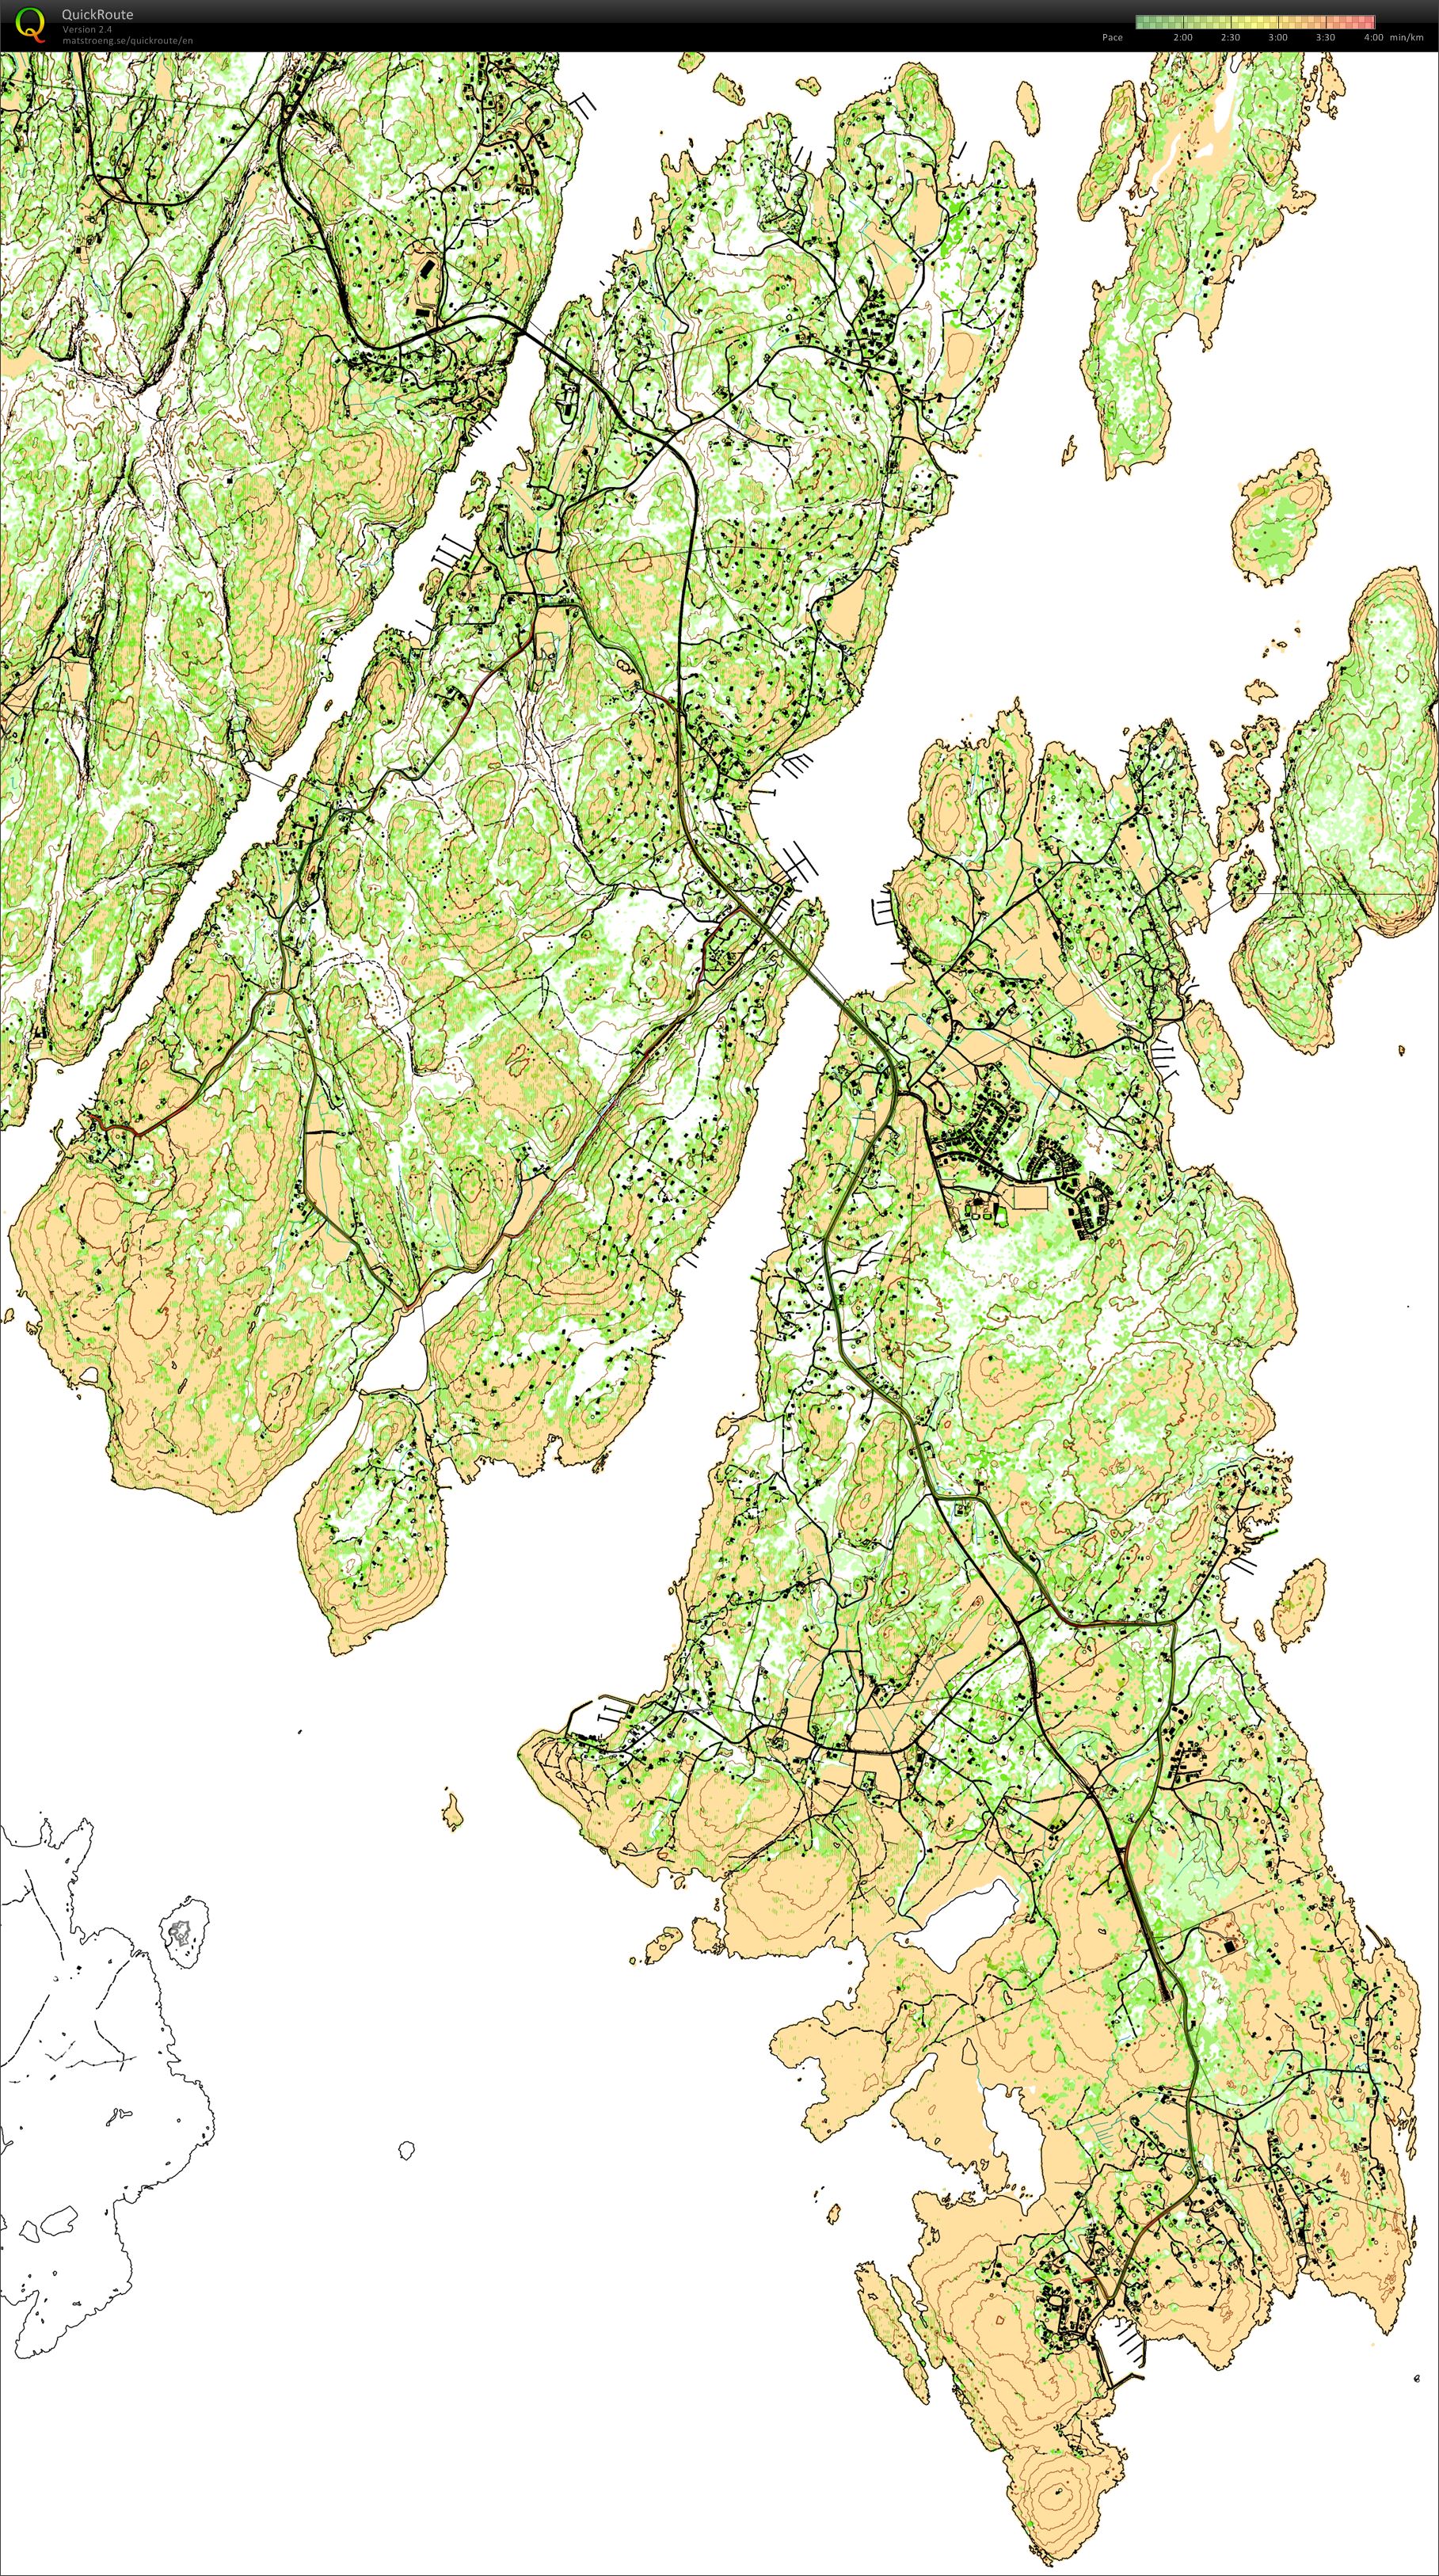 Bike ride on Asmaloy and Spjærøy, using autogenerated map (06/07/2014)